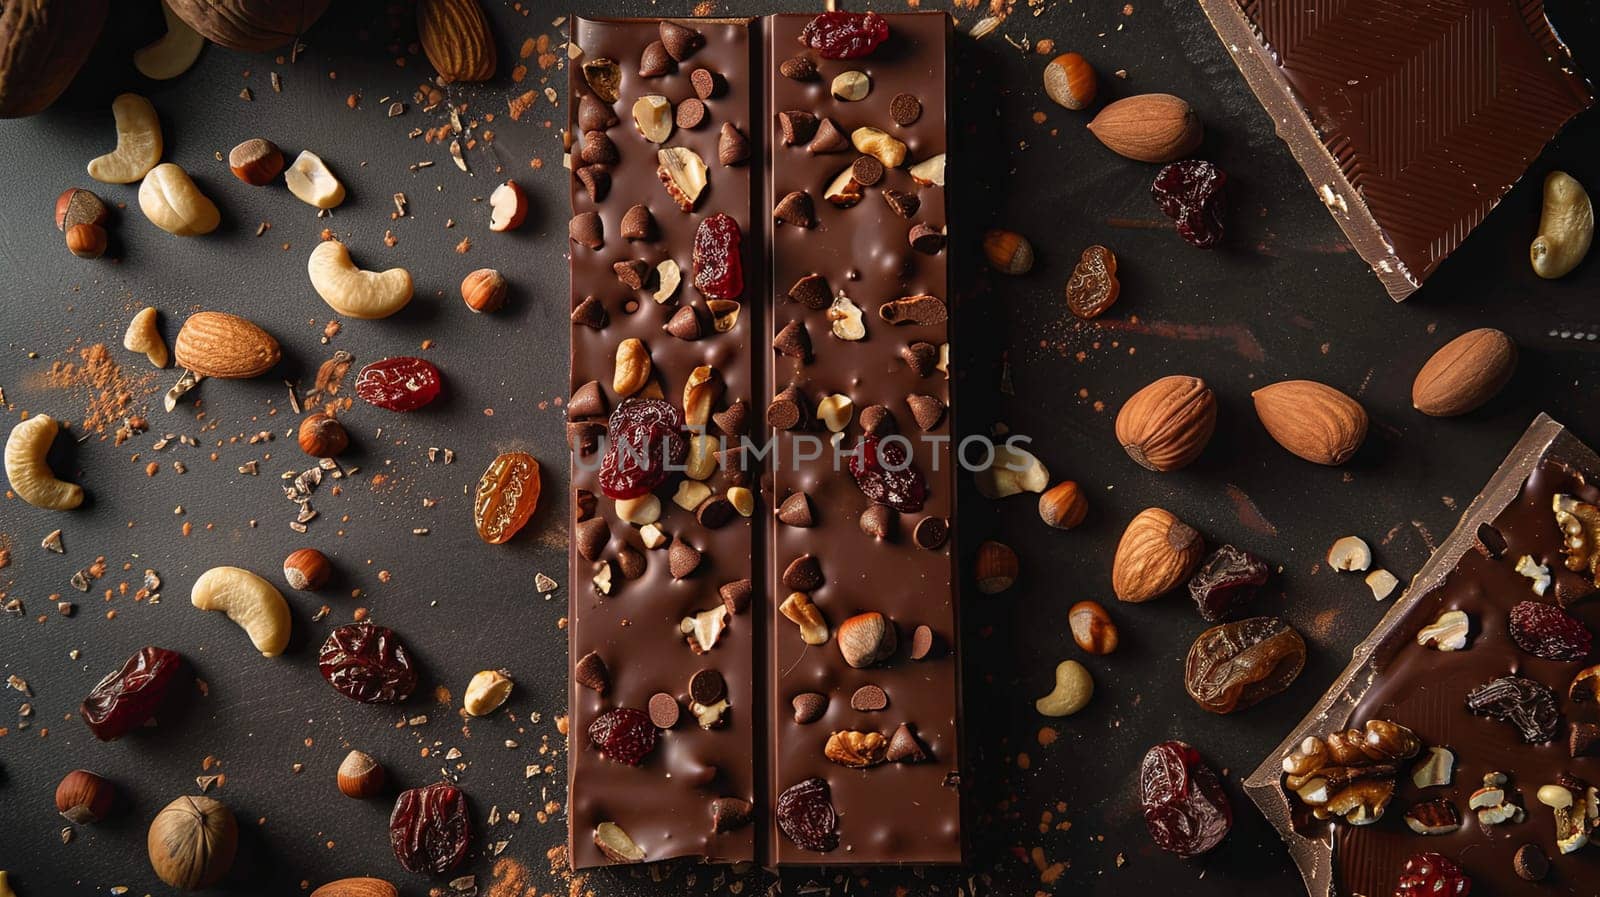 A bar of chocolate topped with crunchy nuts and sweet cranberries, a delicious and appealing treat.